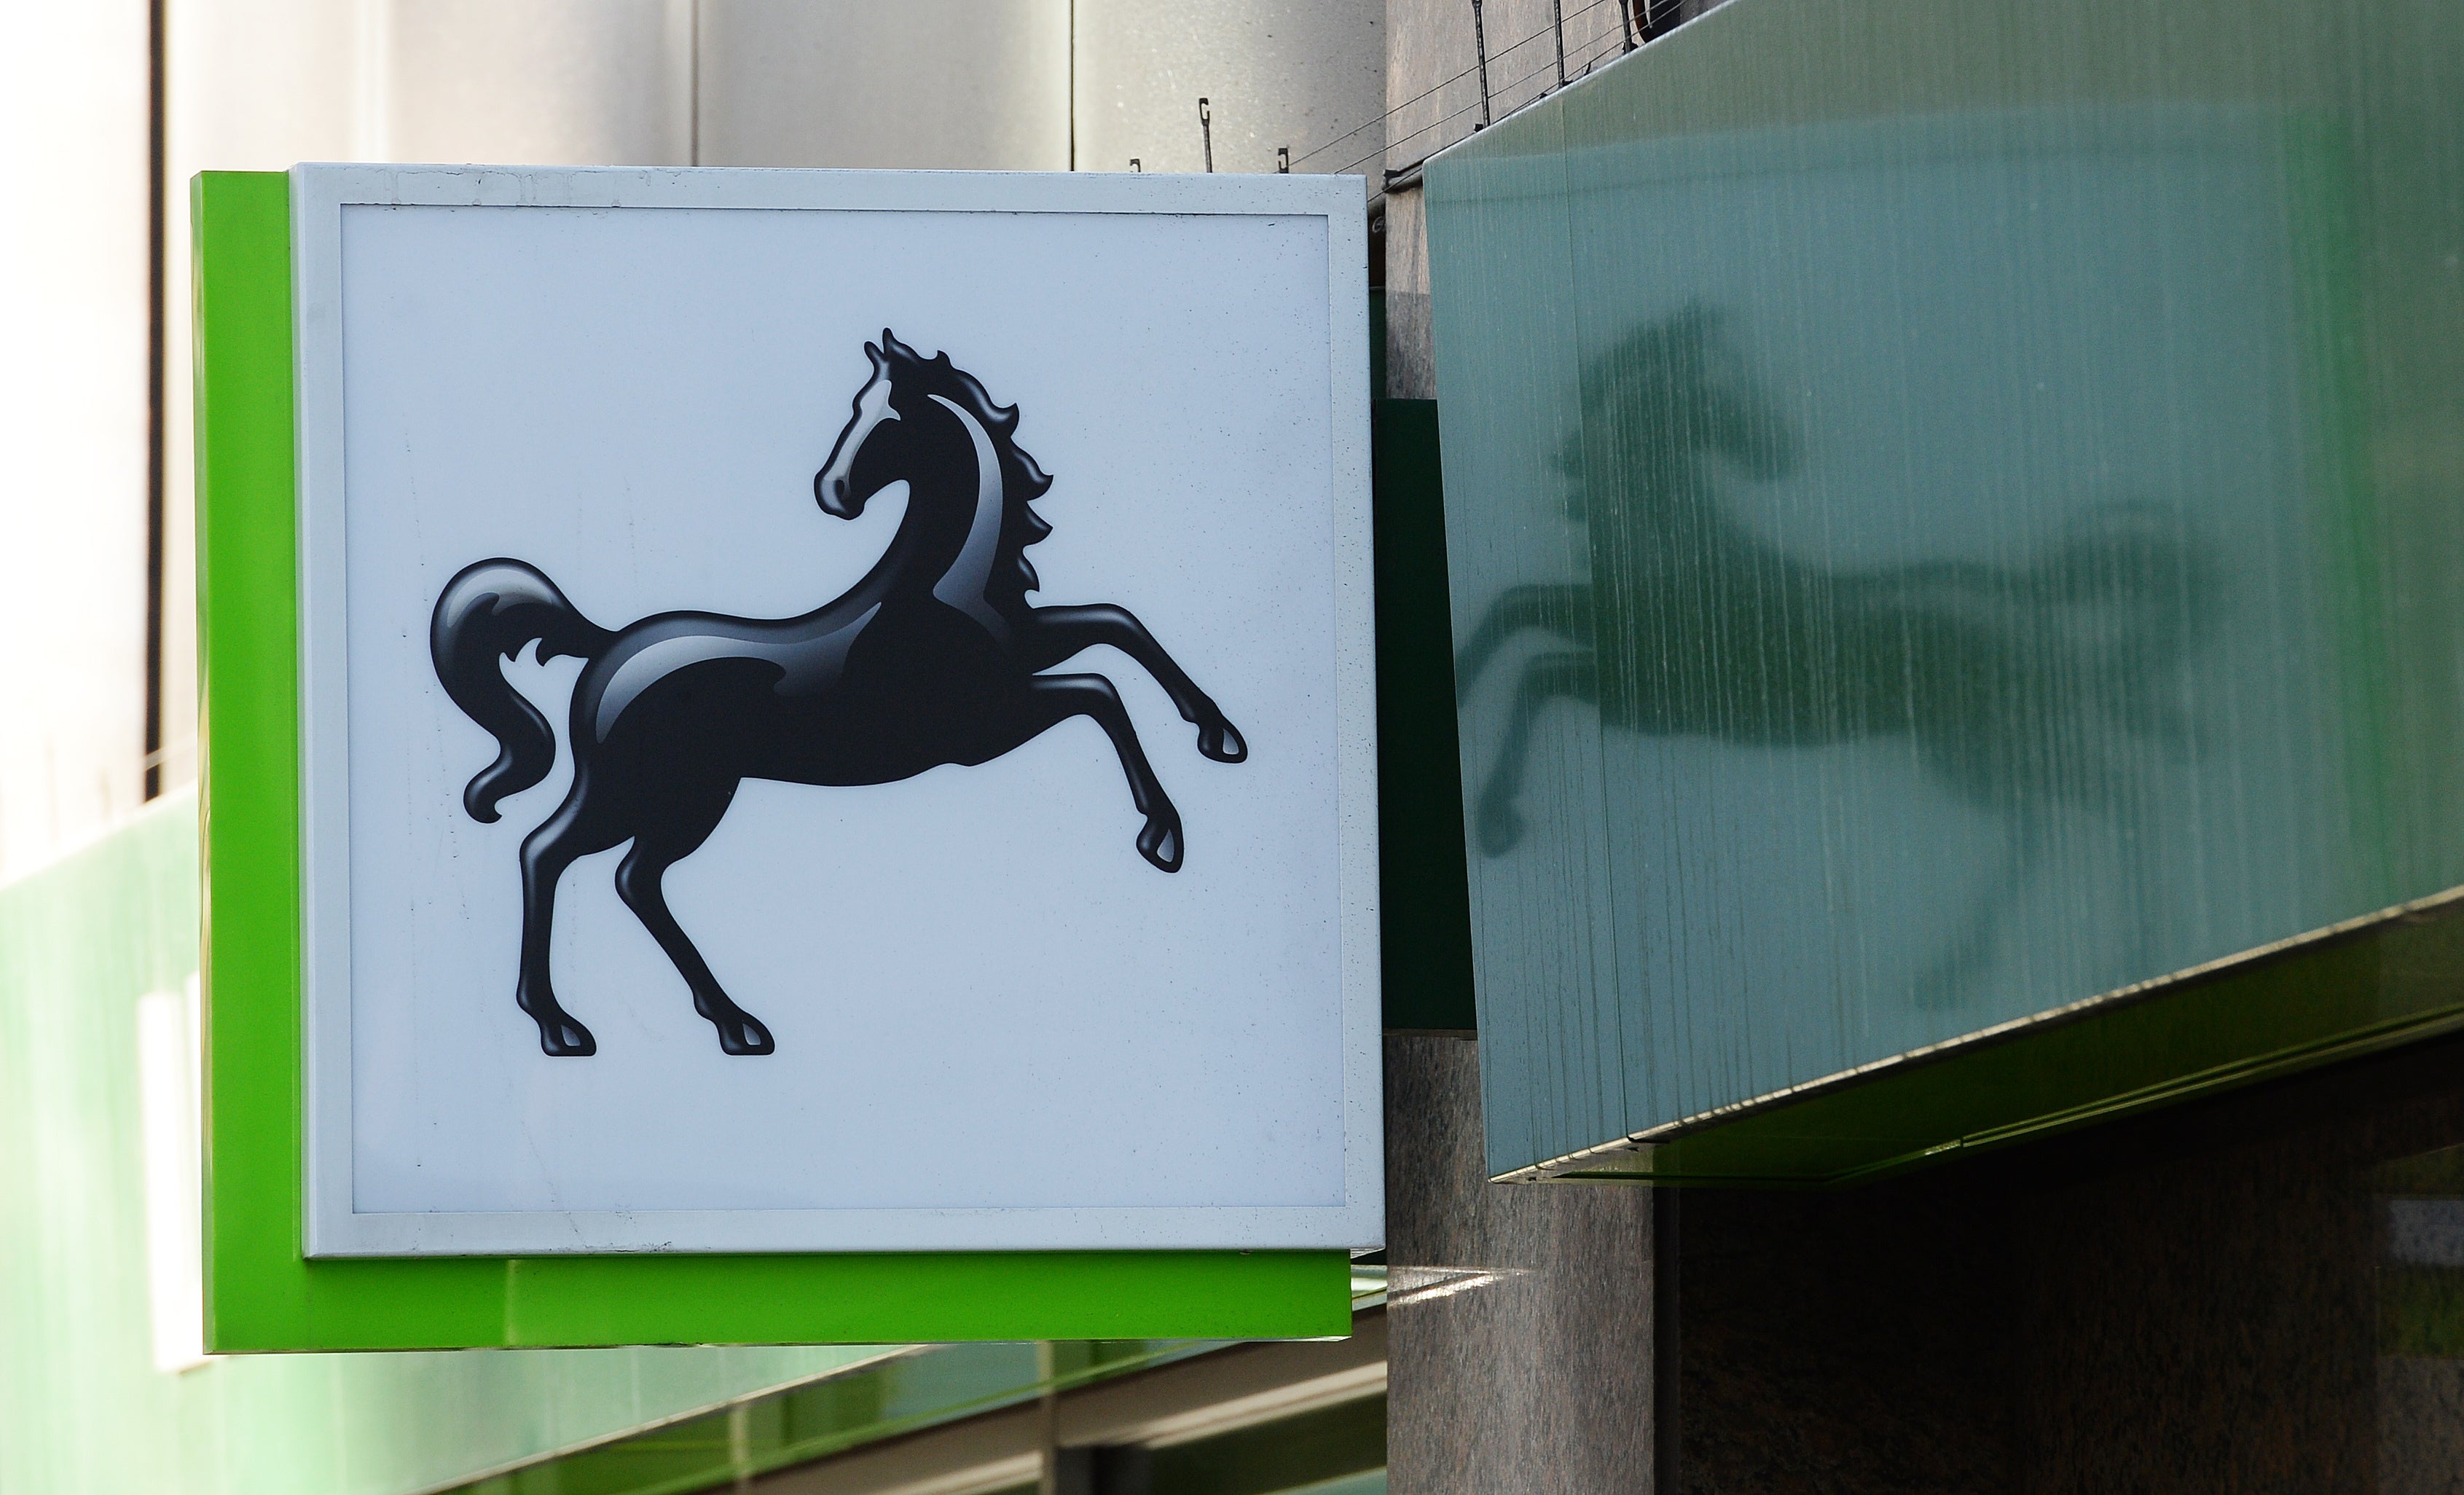 Lloyds Banking Group warned over an ‘uncertain’ wider UK economy due to soaring inflation as it posted a 14% fall in quarterly profits